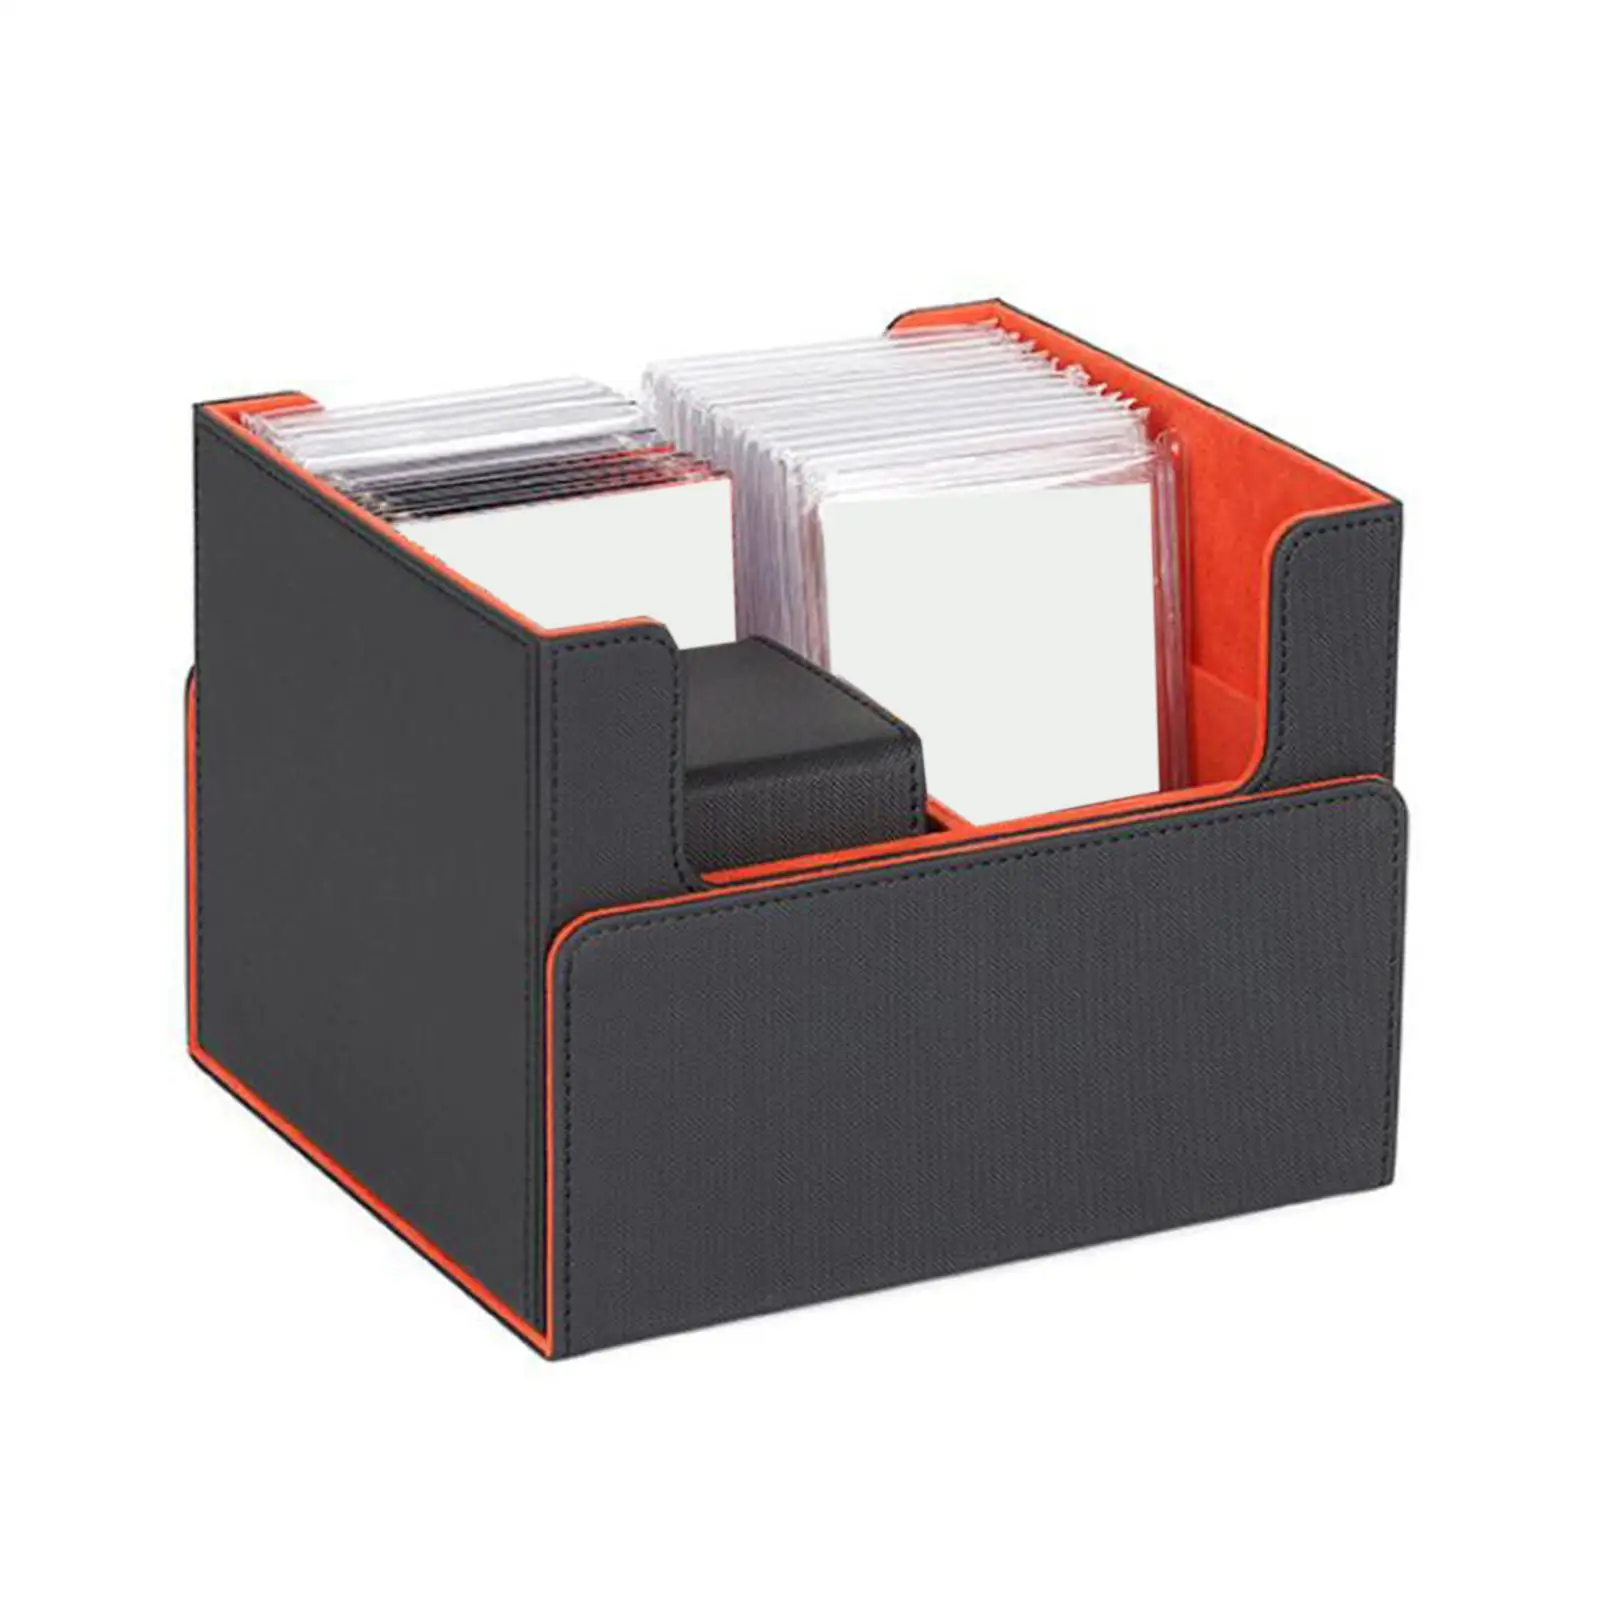 Trading Card Deck Box Holder Large Card Slab Box Organizer Storage Case Protective Display Container for MTG TCG Card Games